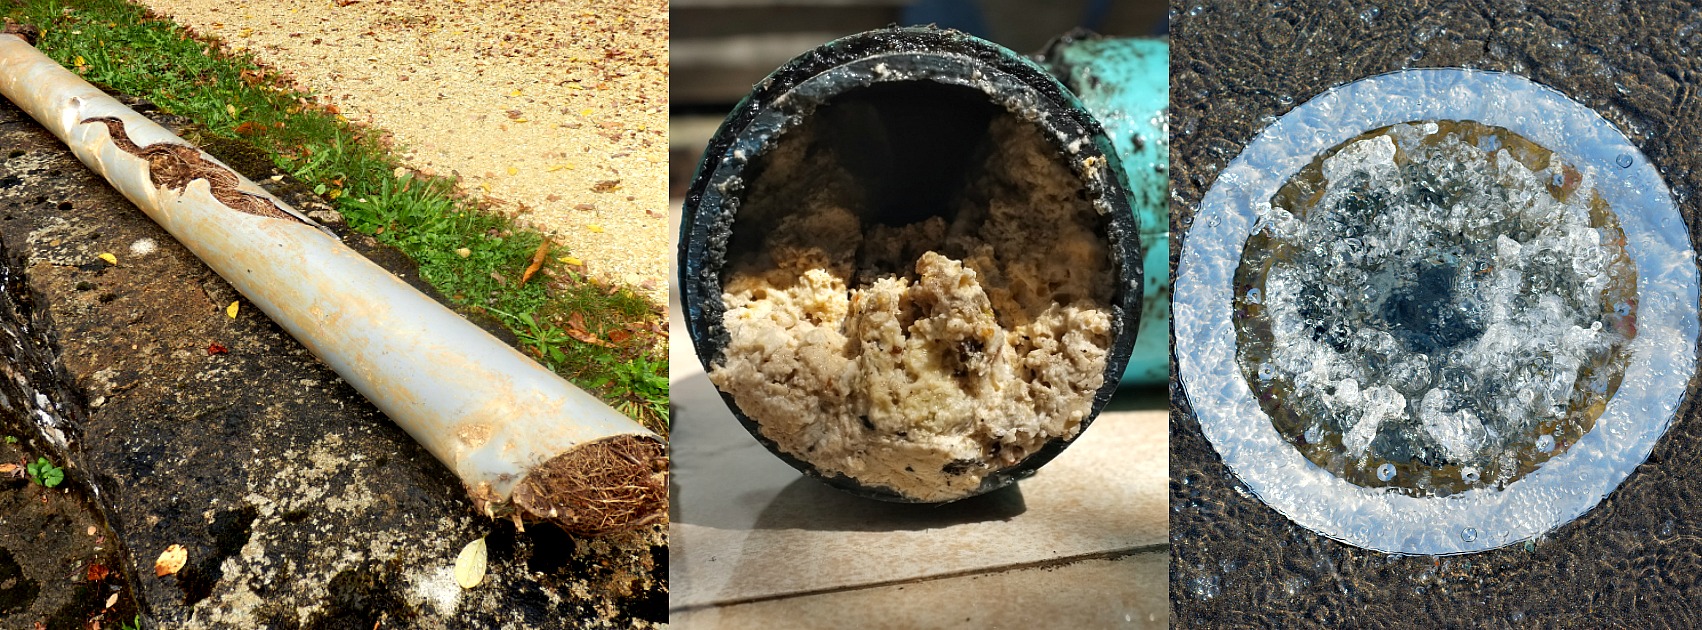 3 Warning Signs of a Clogged Sewer Line - Rodger's Plumbing